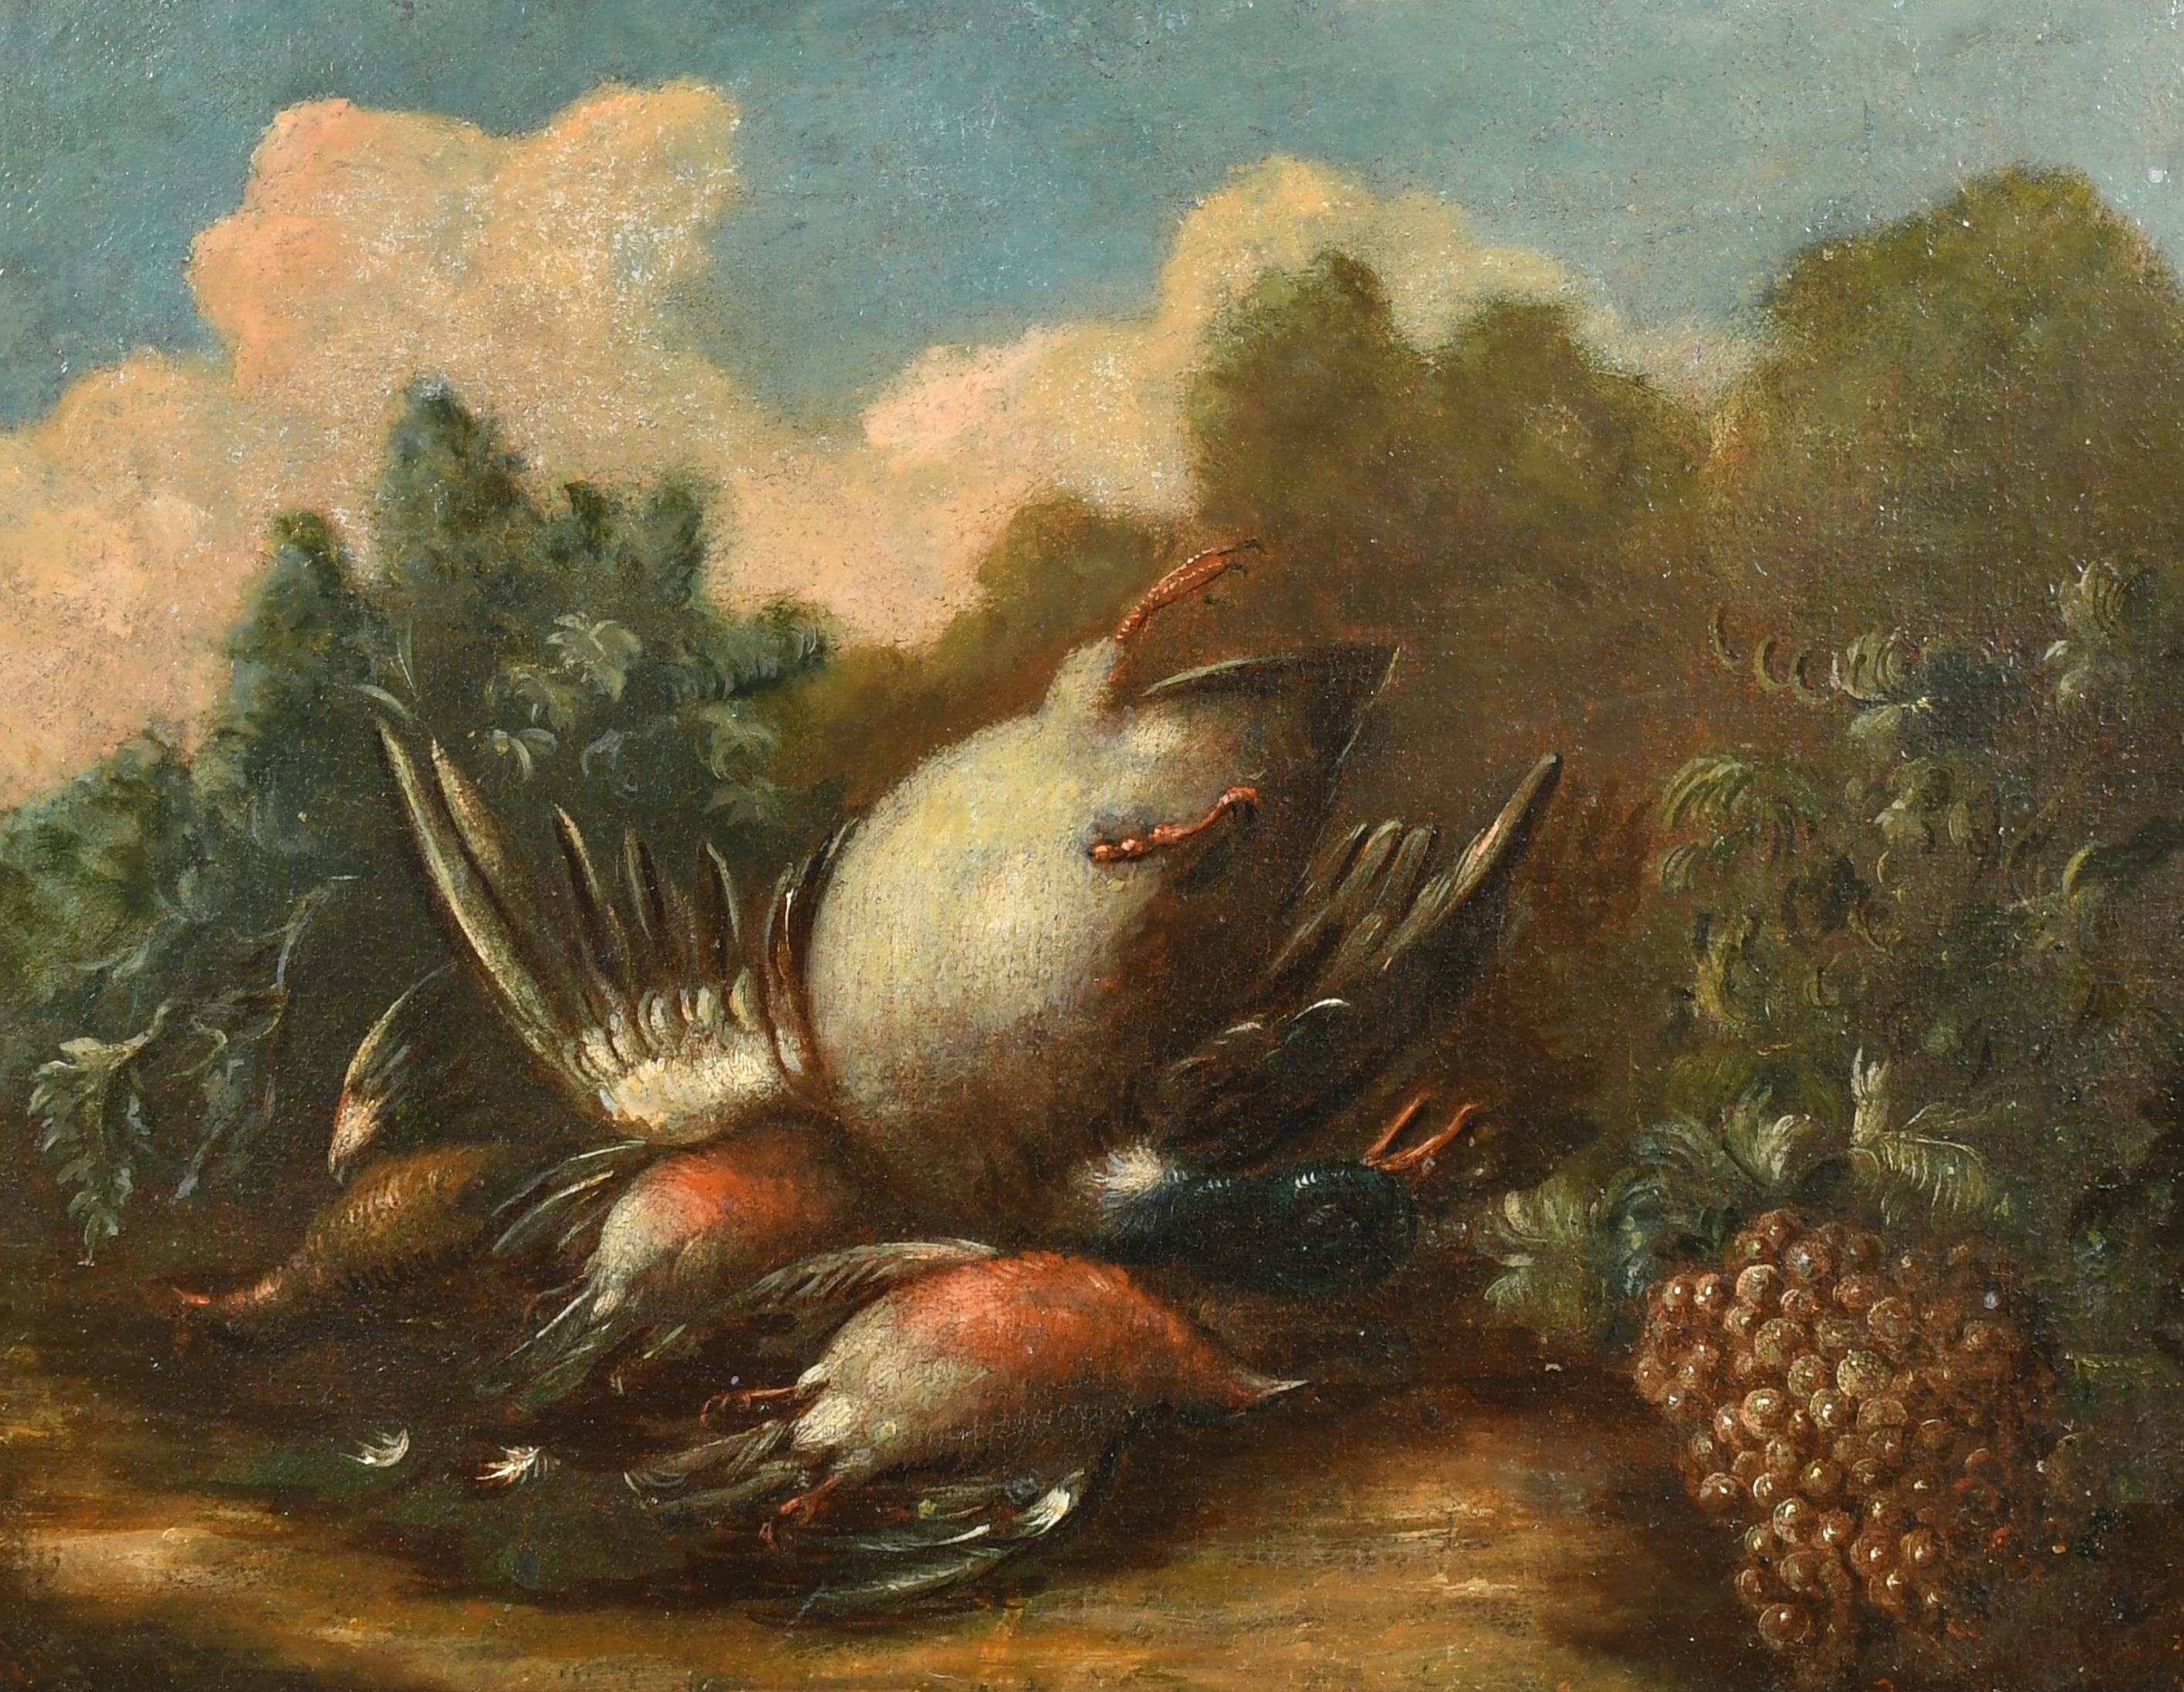 Still Life with Dead Birds
18th Century Italian School
oil painting on canvas, framed
framed: 17 x 21 inches
canvas: 14 x 18 inches 
provenance: private collection, Surrey, England 
condition: very good and sound condition